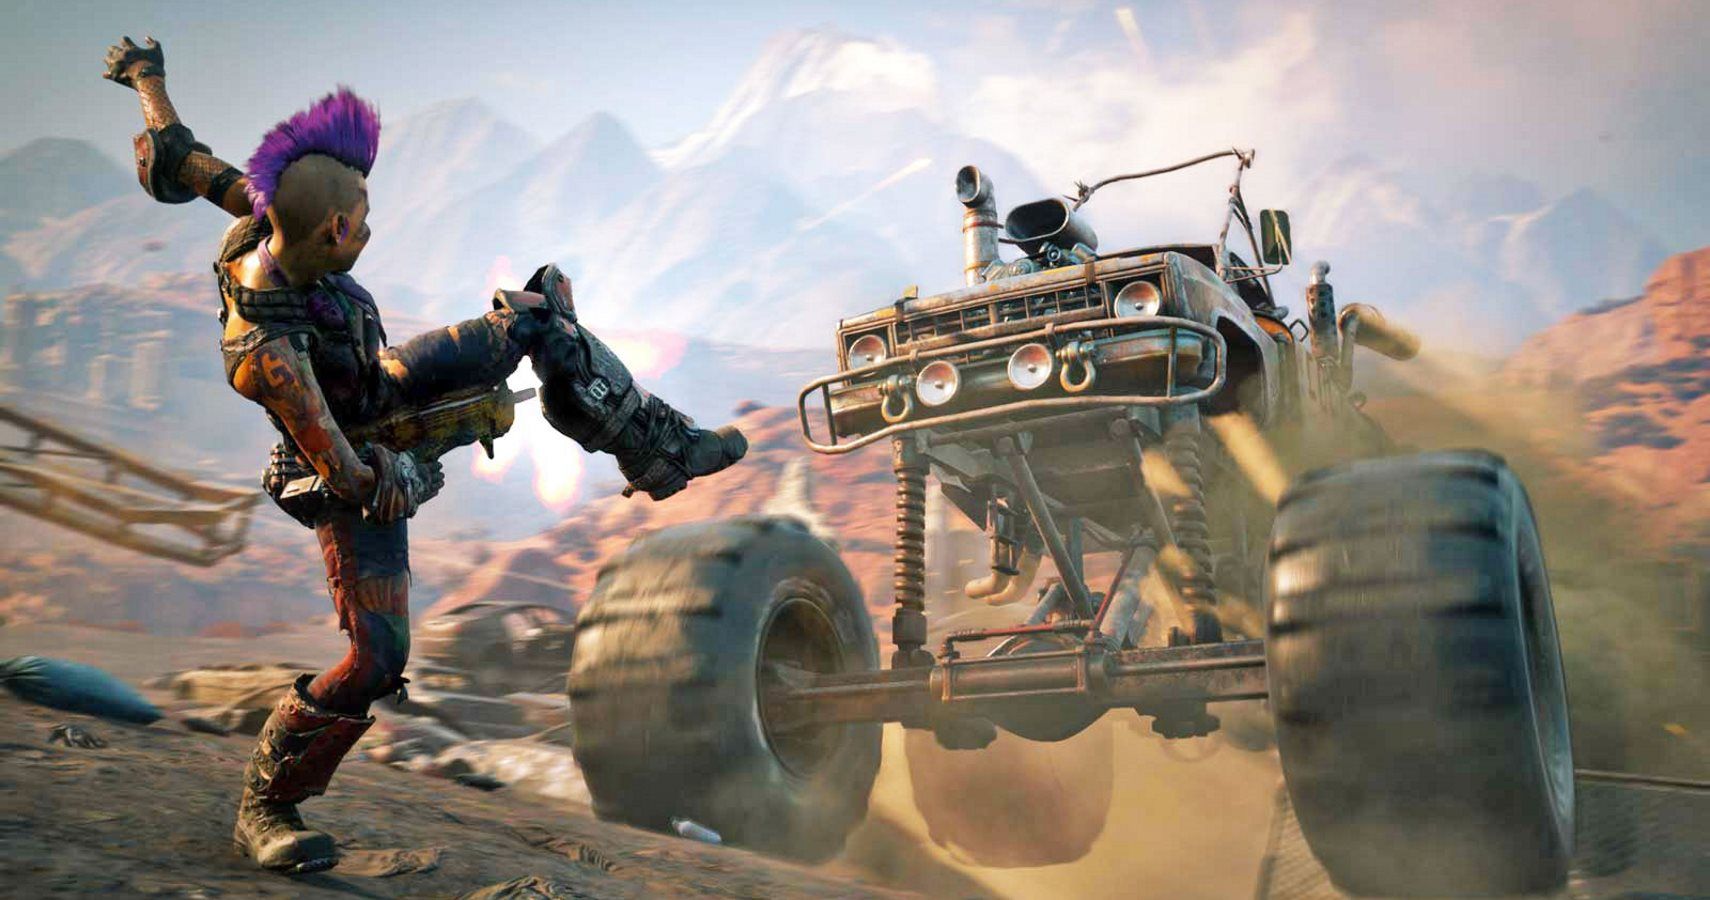 Rage 2 Developers Insist The Game Will Not Have Loading Screens